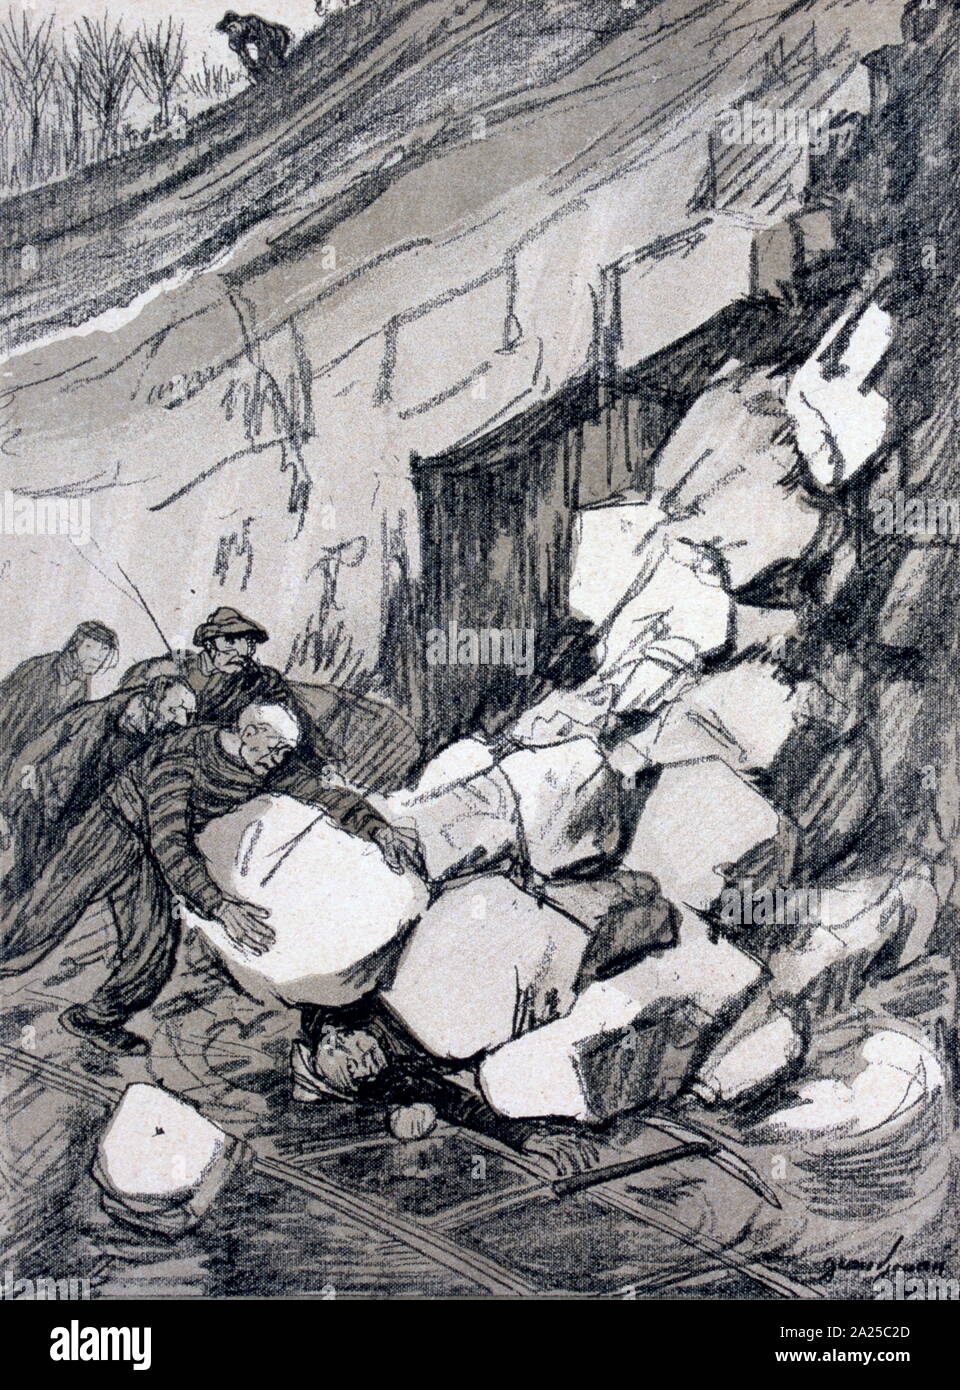 French Illustration showing dangerous conditions for quarry workers in the construction industry. France 1906 Stock Photo